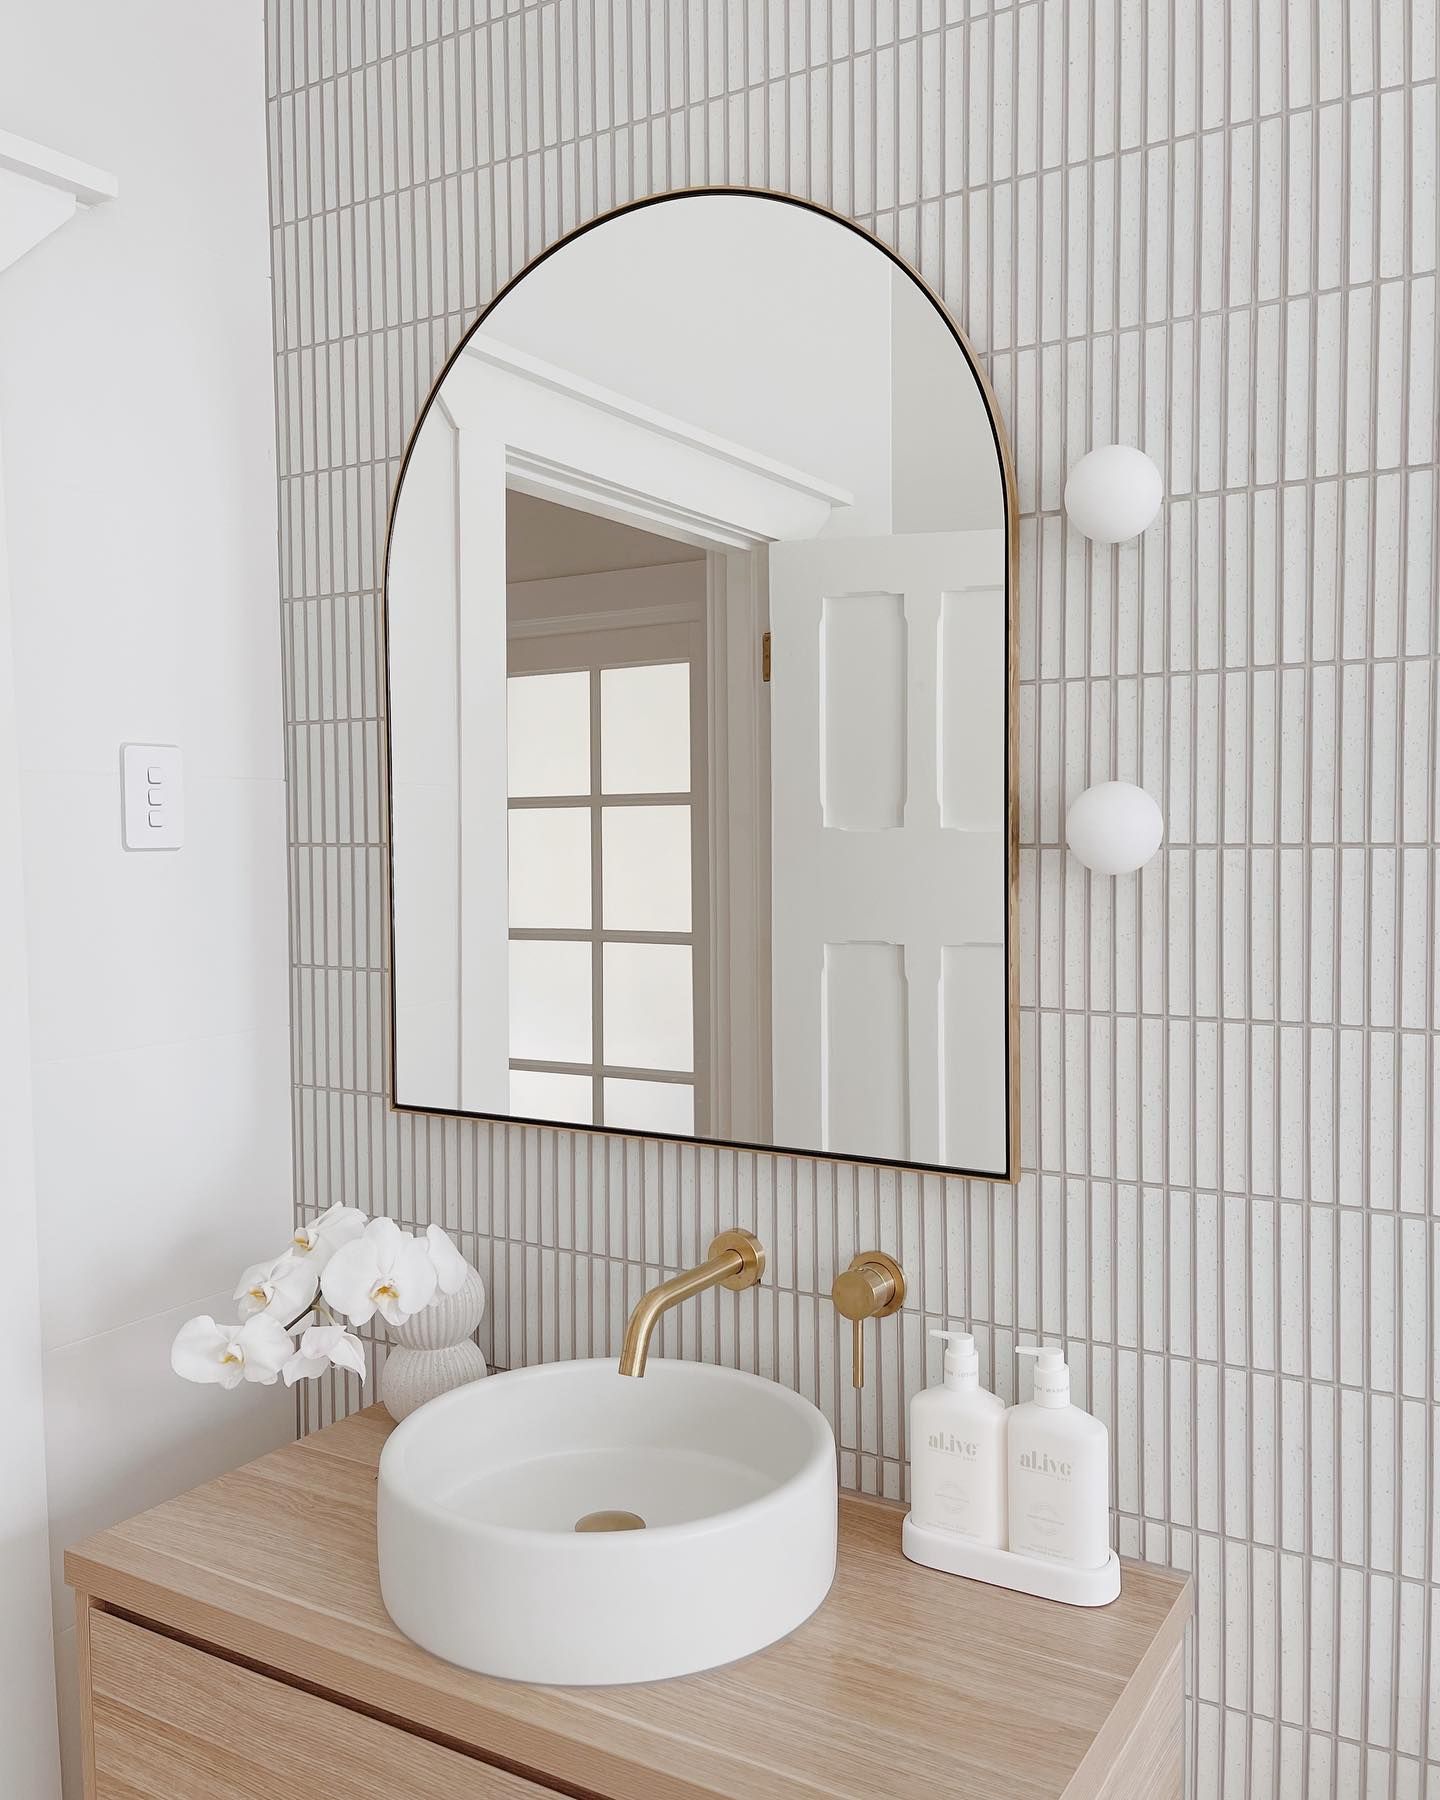 The Benefits of Bathroom Mirrors with
Integrated Lighting